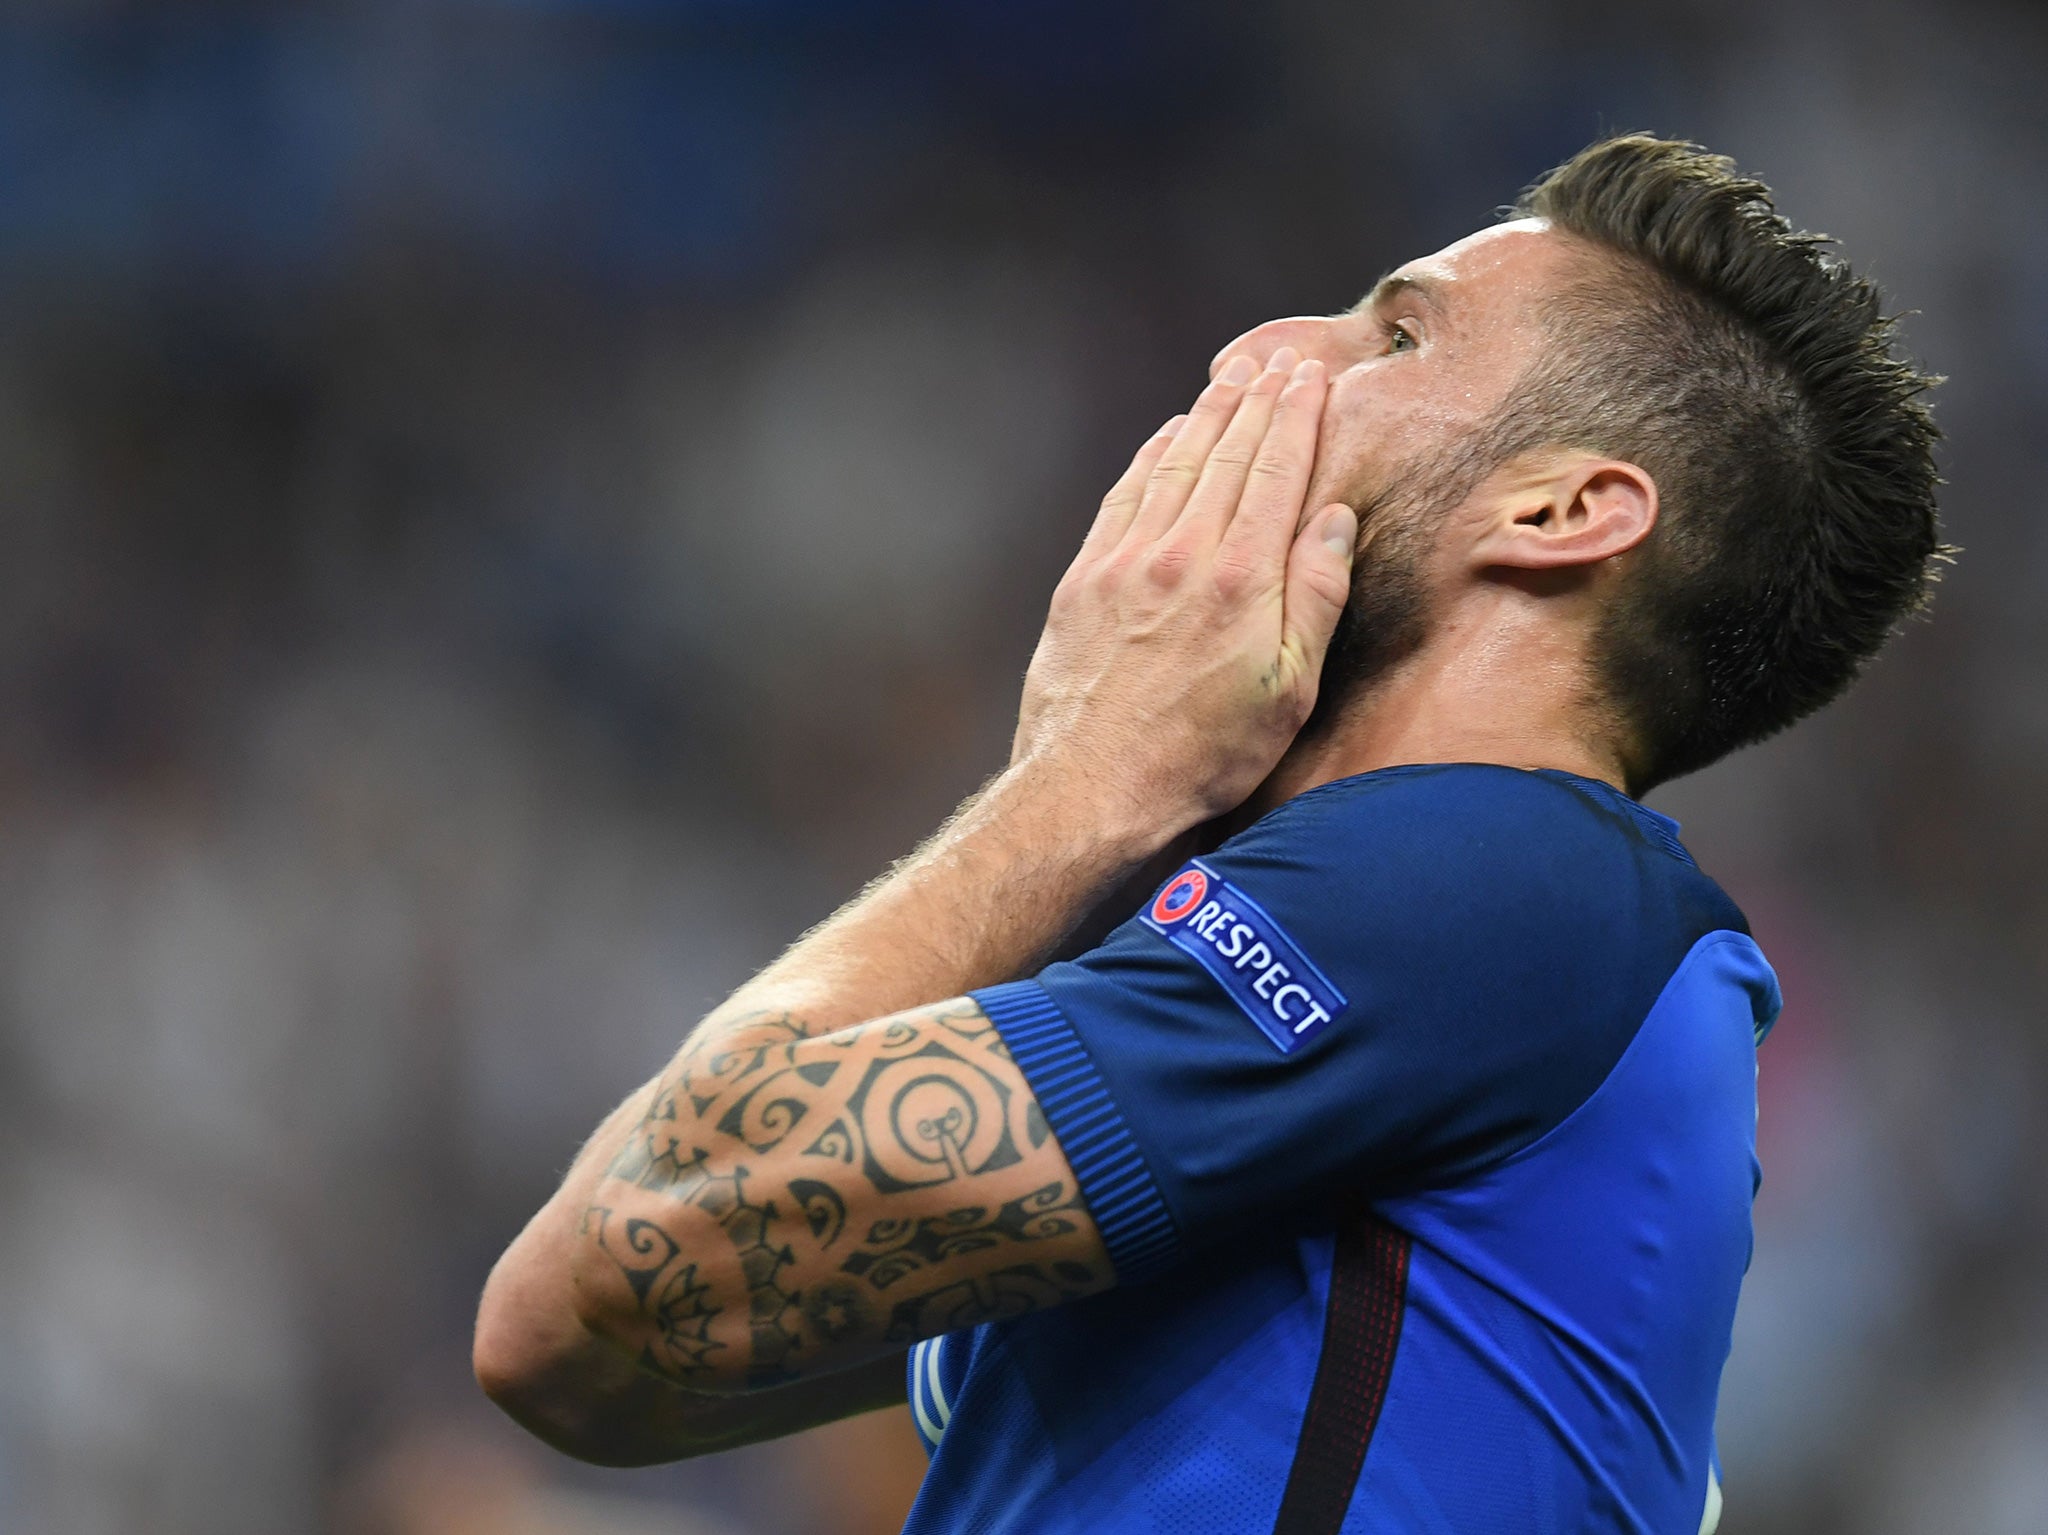 Giroud was on the losing side in Sunday's European Championships final